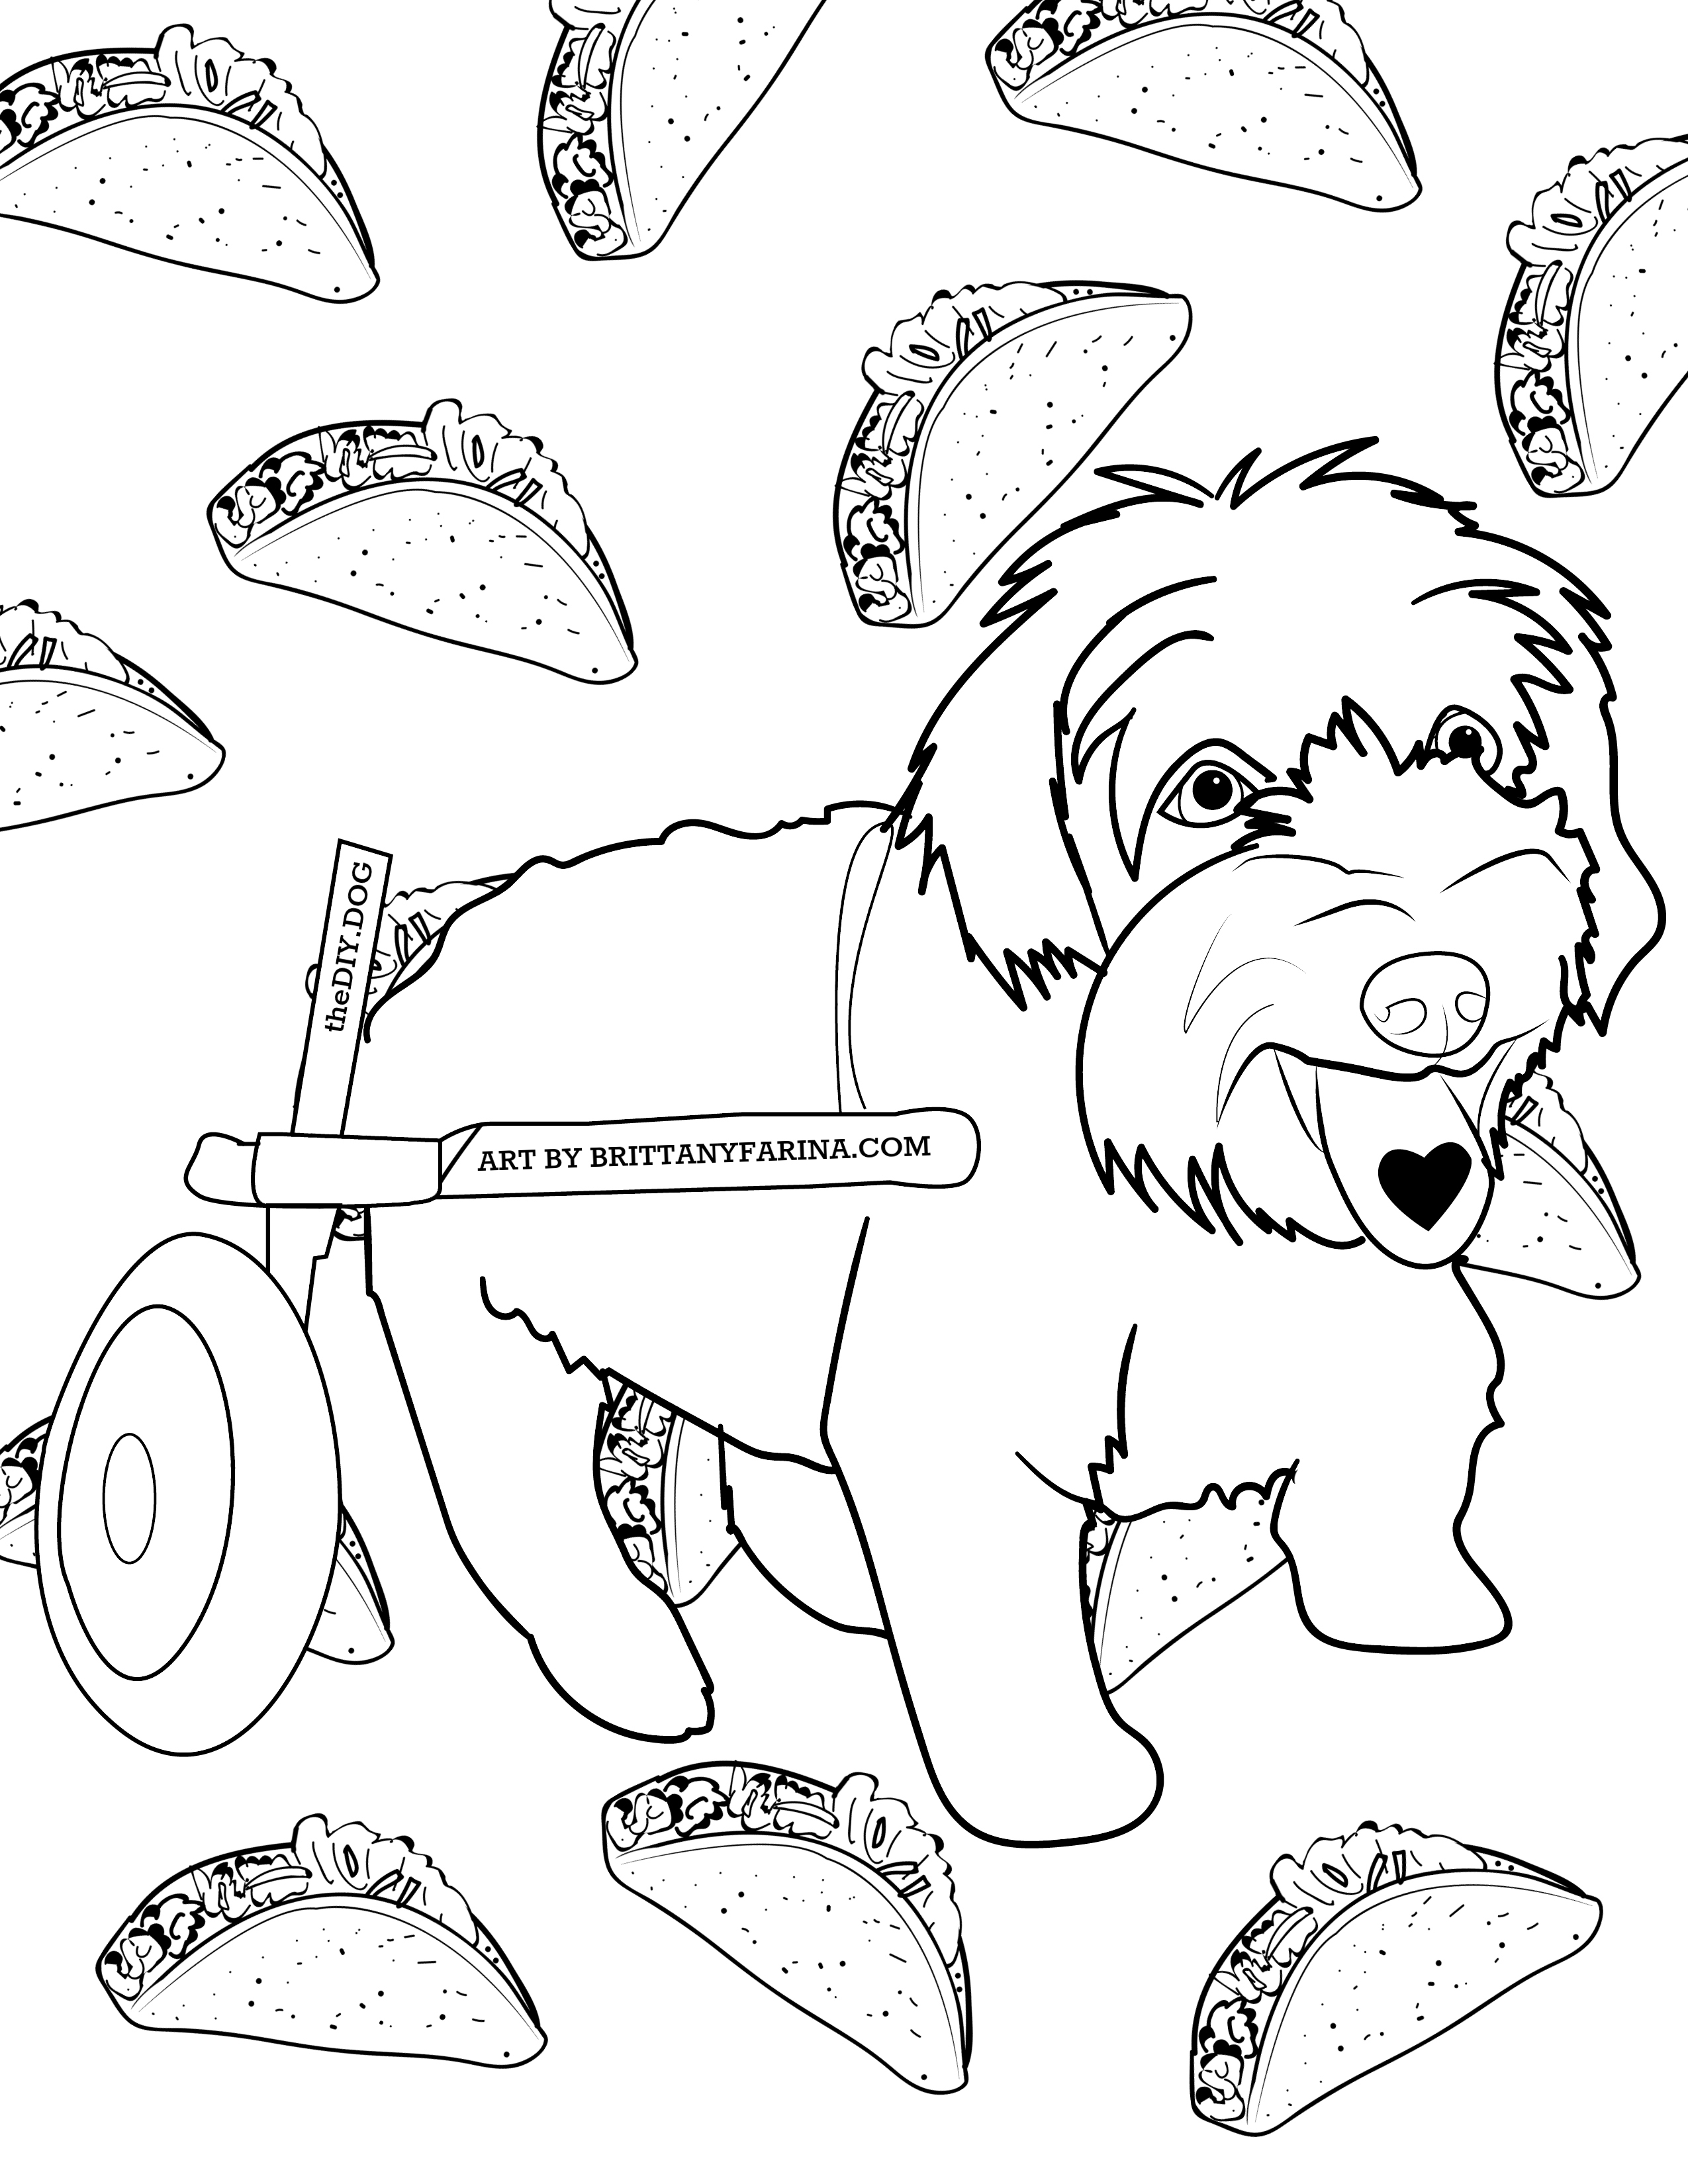 How To Turn Your Dog Into a Coloring Page - Kol's Notes